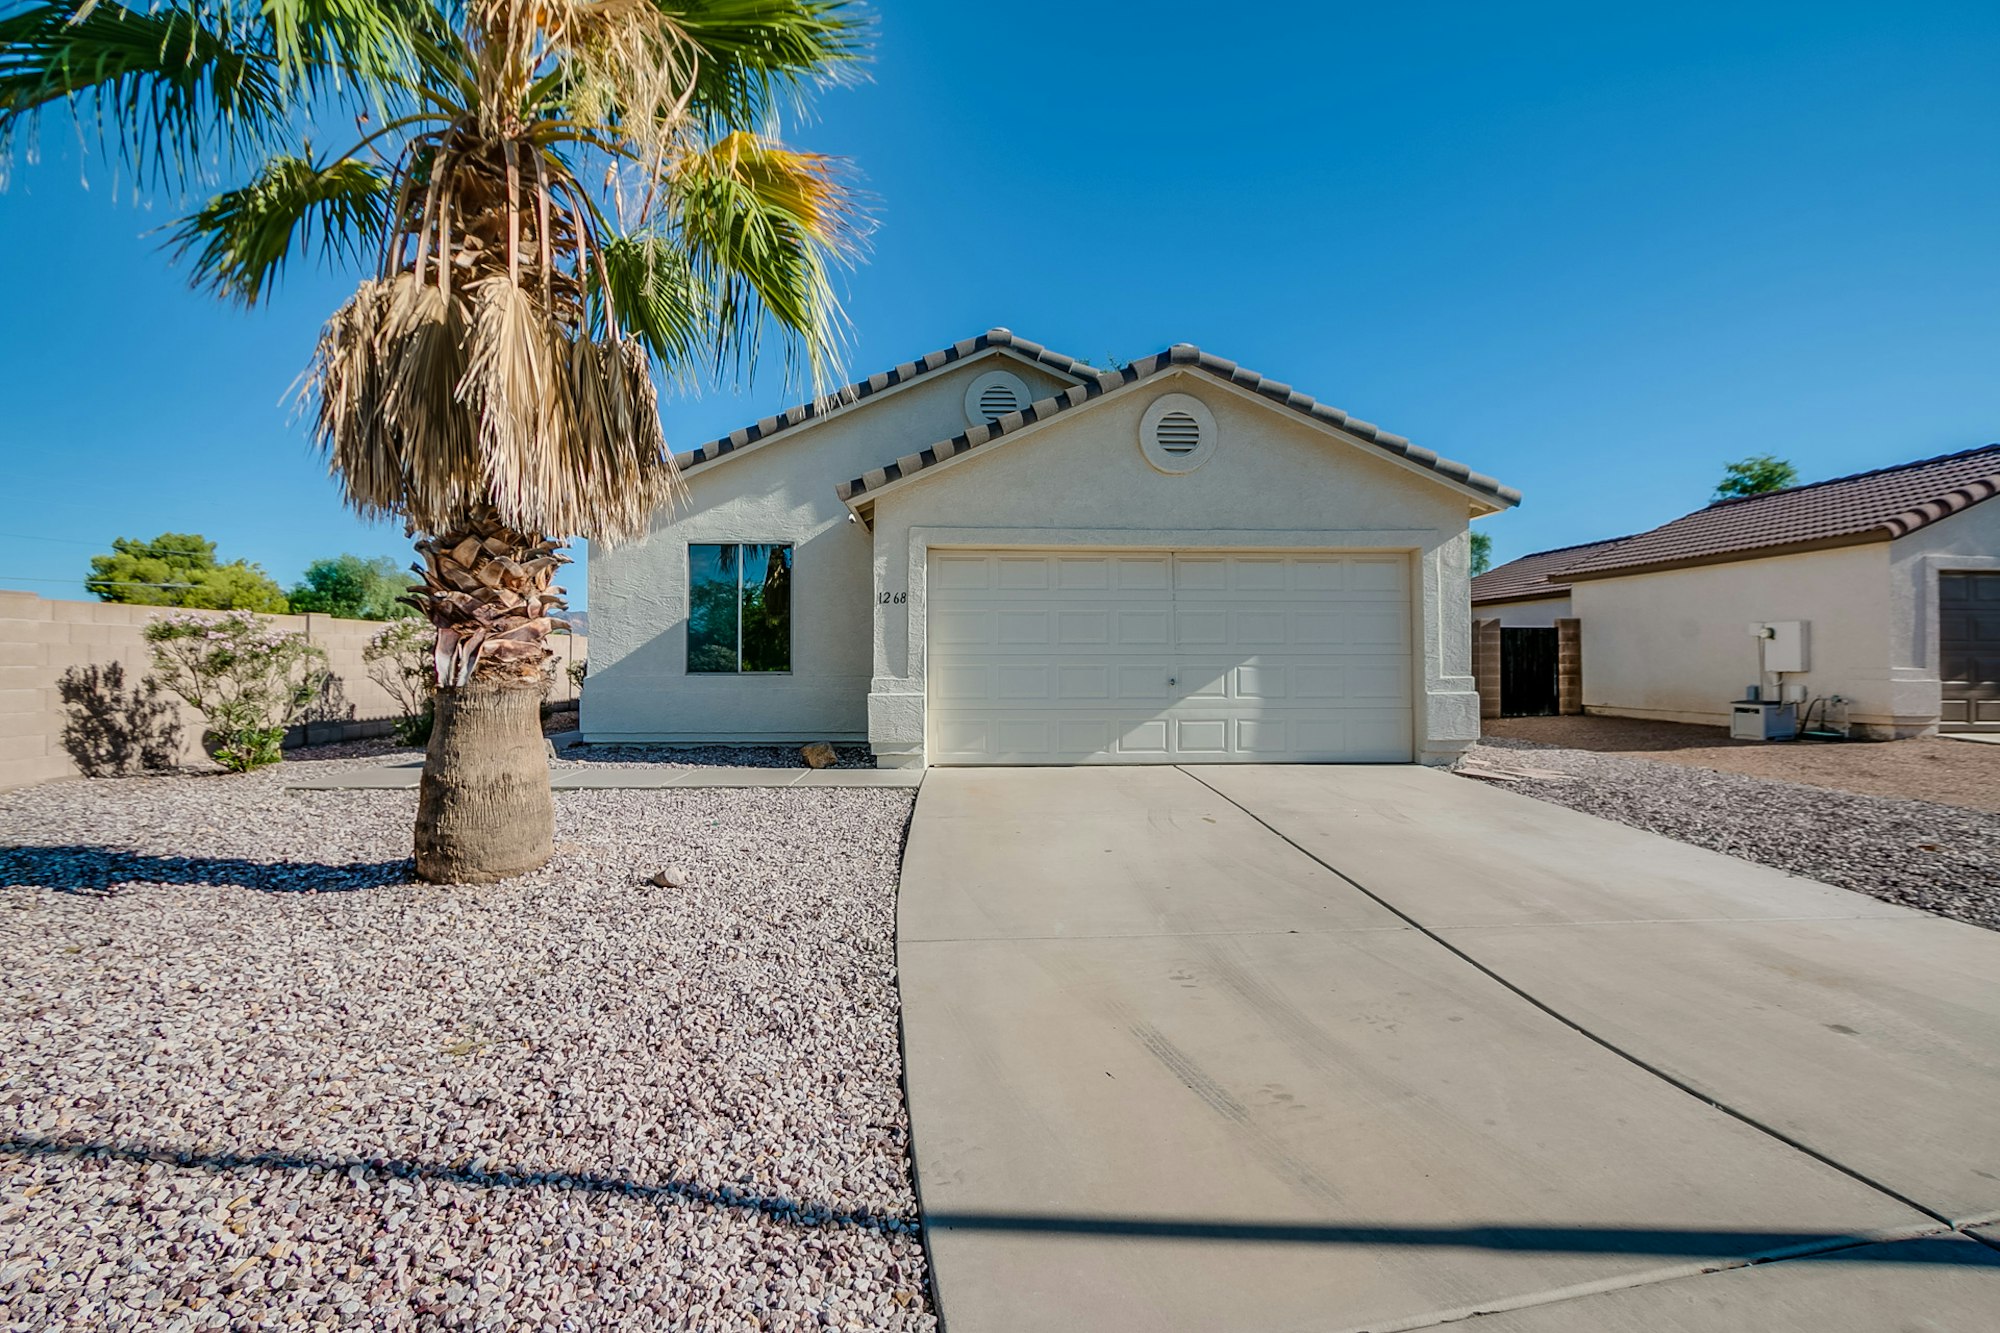 Photo 1 of 25 - 1268 W 7th Ave, Apache Junction, AZ 85120